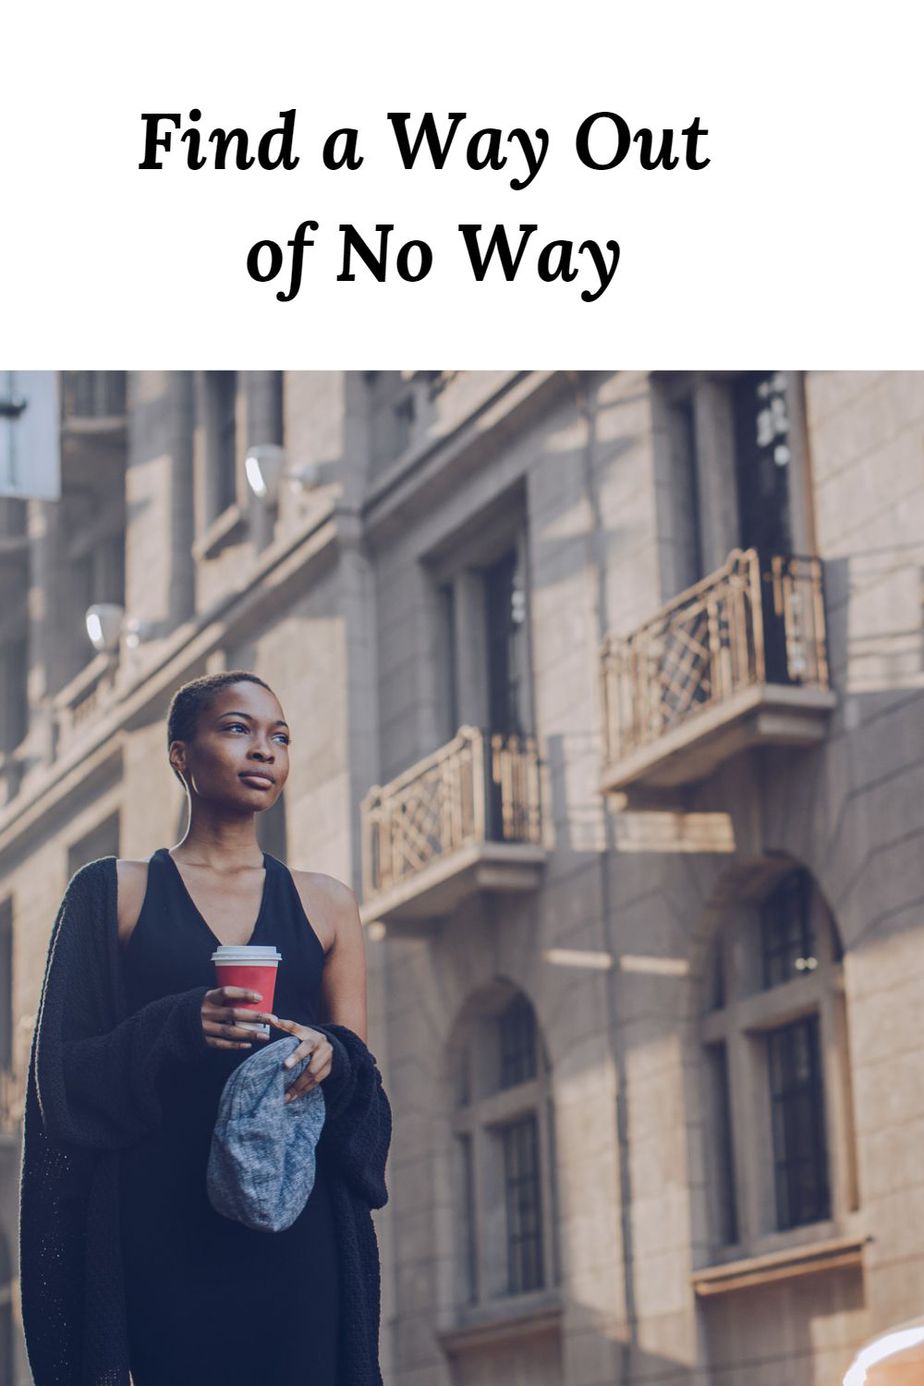 Find a Way Out of No Way